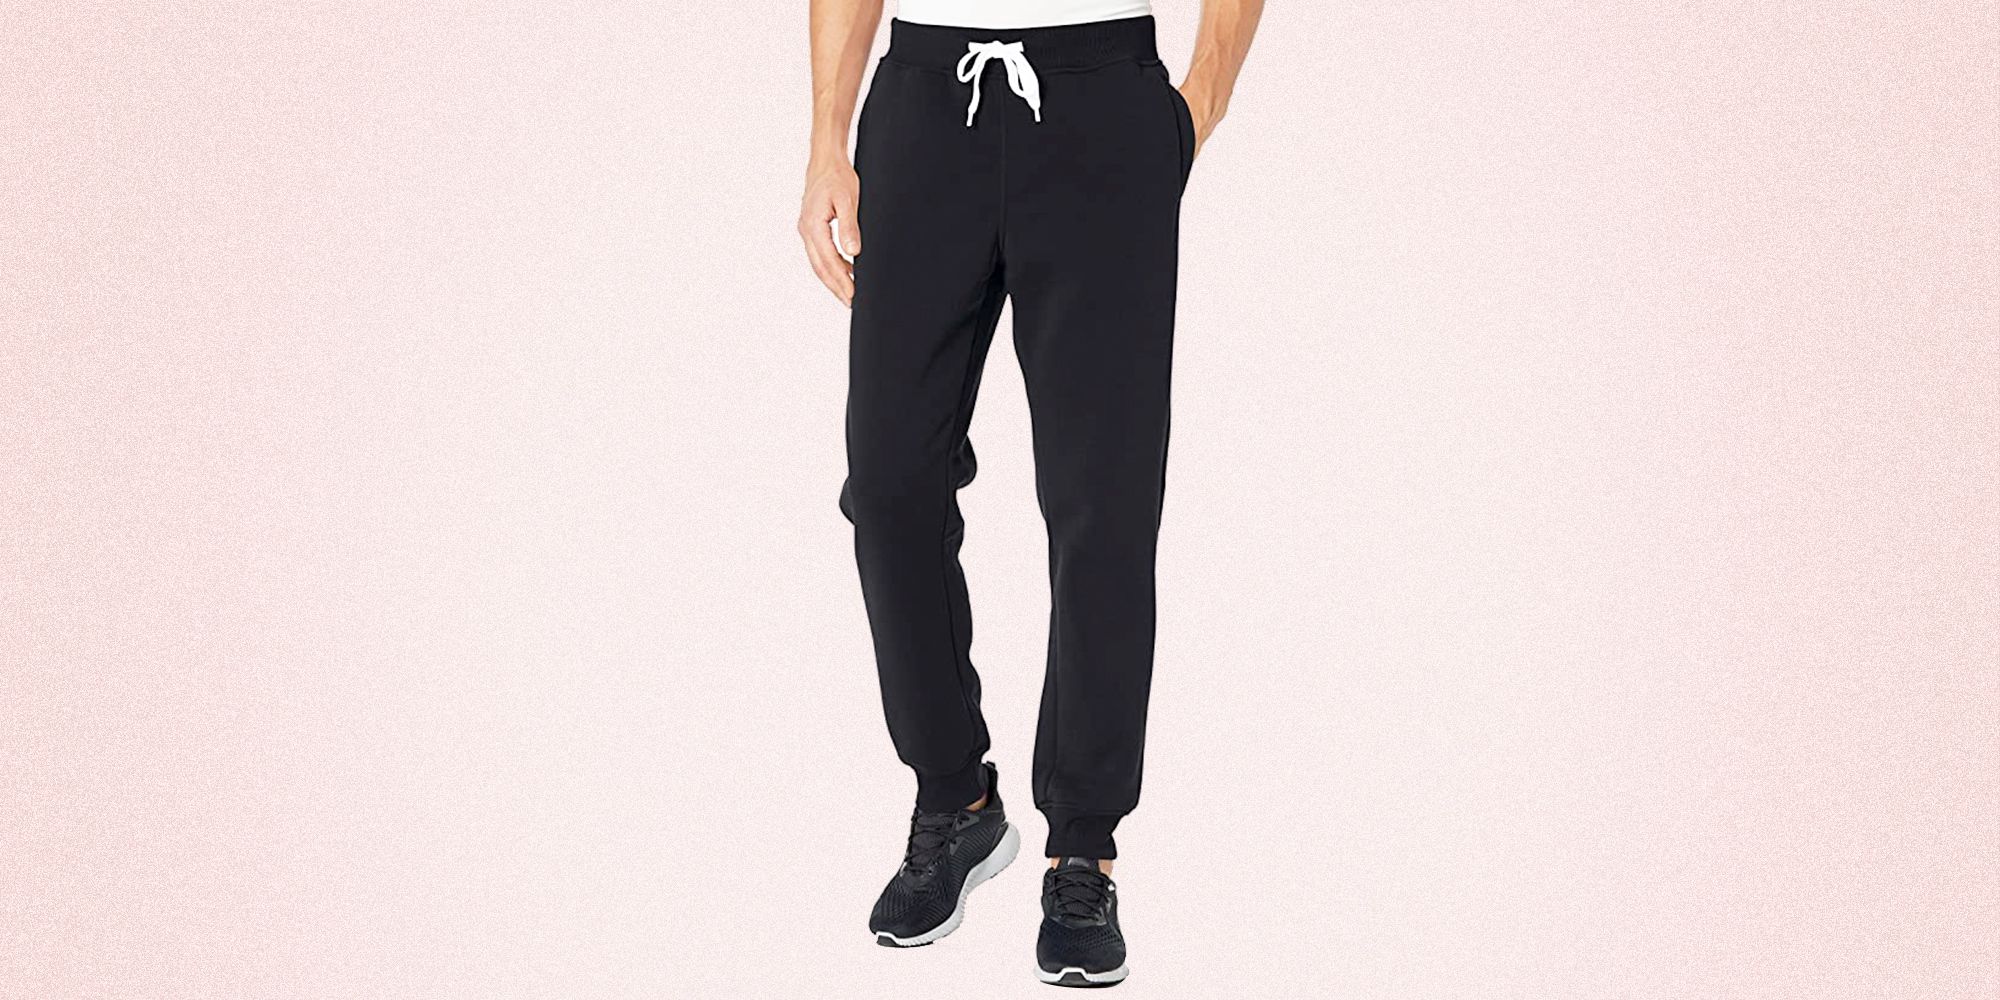 41 Best Sweatpants For Men To Wear In 2023, According To Style Experts ...